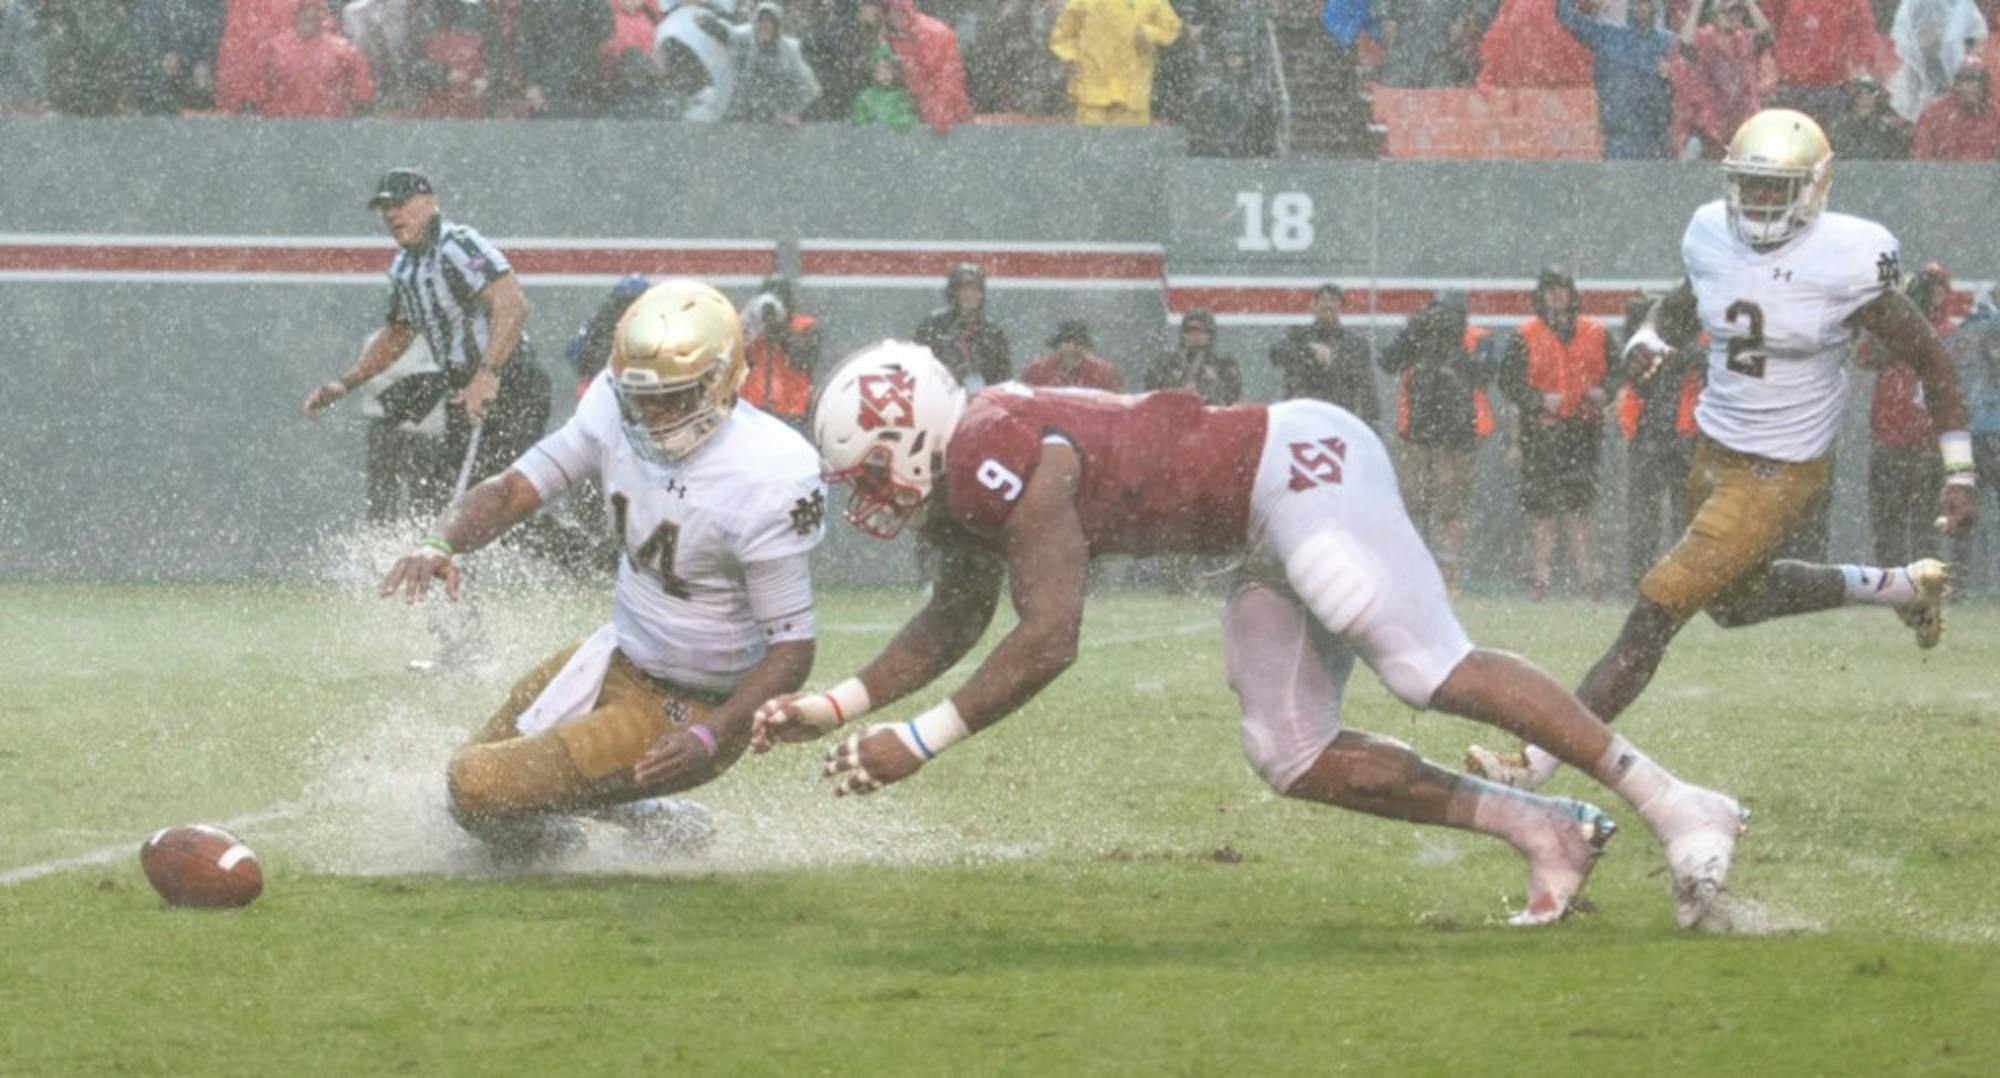 Irish junior quarterback DeShone Kizer and N.C. State junior defensive end Bradley Chubb dive for the loose ball after a miscommunication between Kizer and junior center Sam Mustipher. Kizer recovered the loose football.